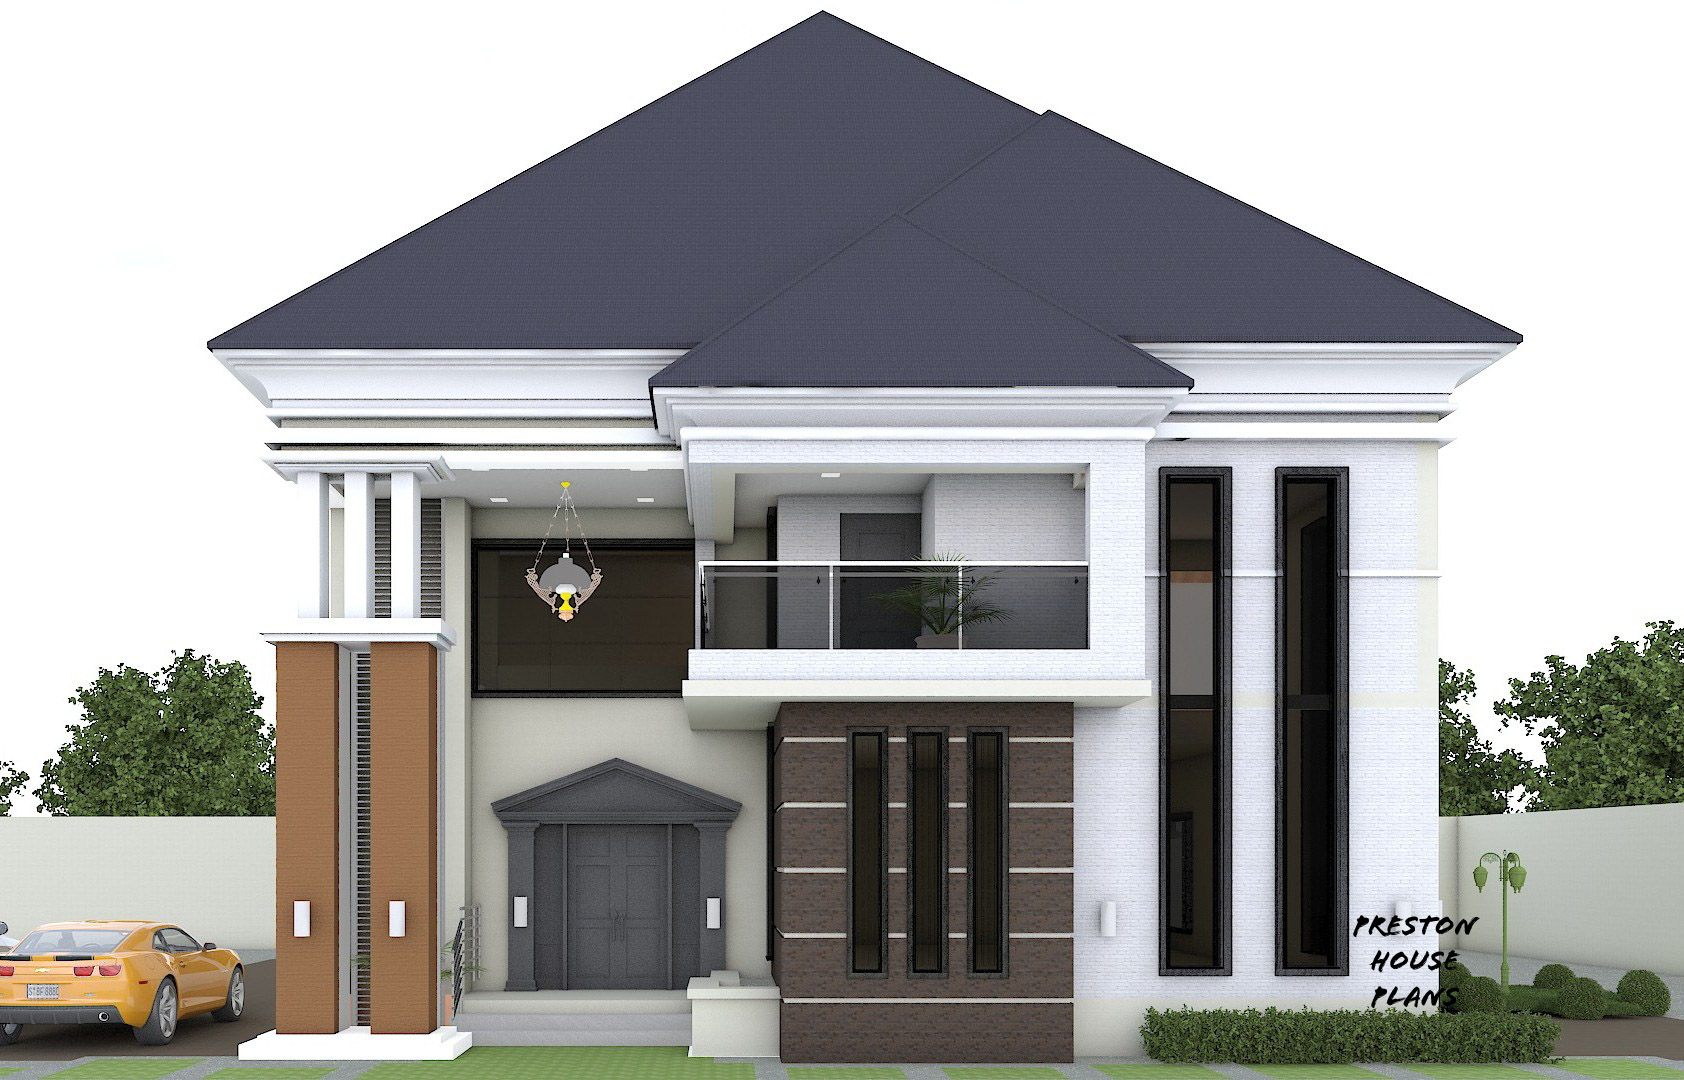 4 bedroom Duplex Plan with a Penthouse